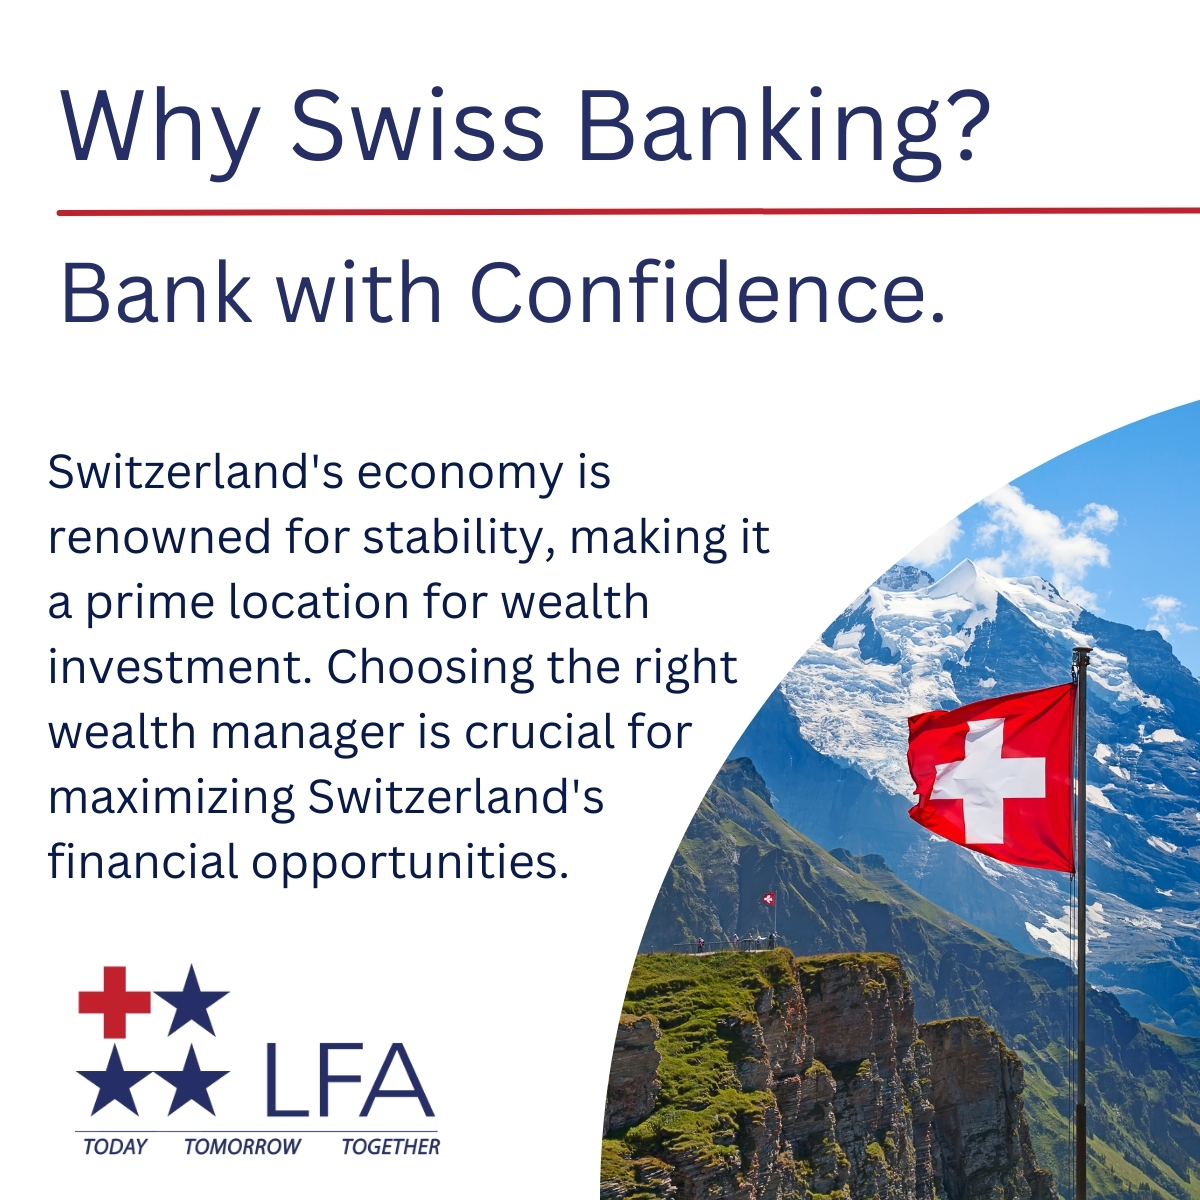 Switzerland is a beacon of stability and offers opportunities for wealth investment. We understand the importance of choosing the right wealth manager to navigate these financial waters. Discover the power of Swiss Banking with LFA.

#LFABanking #SwissWealth #FinancialExcellence